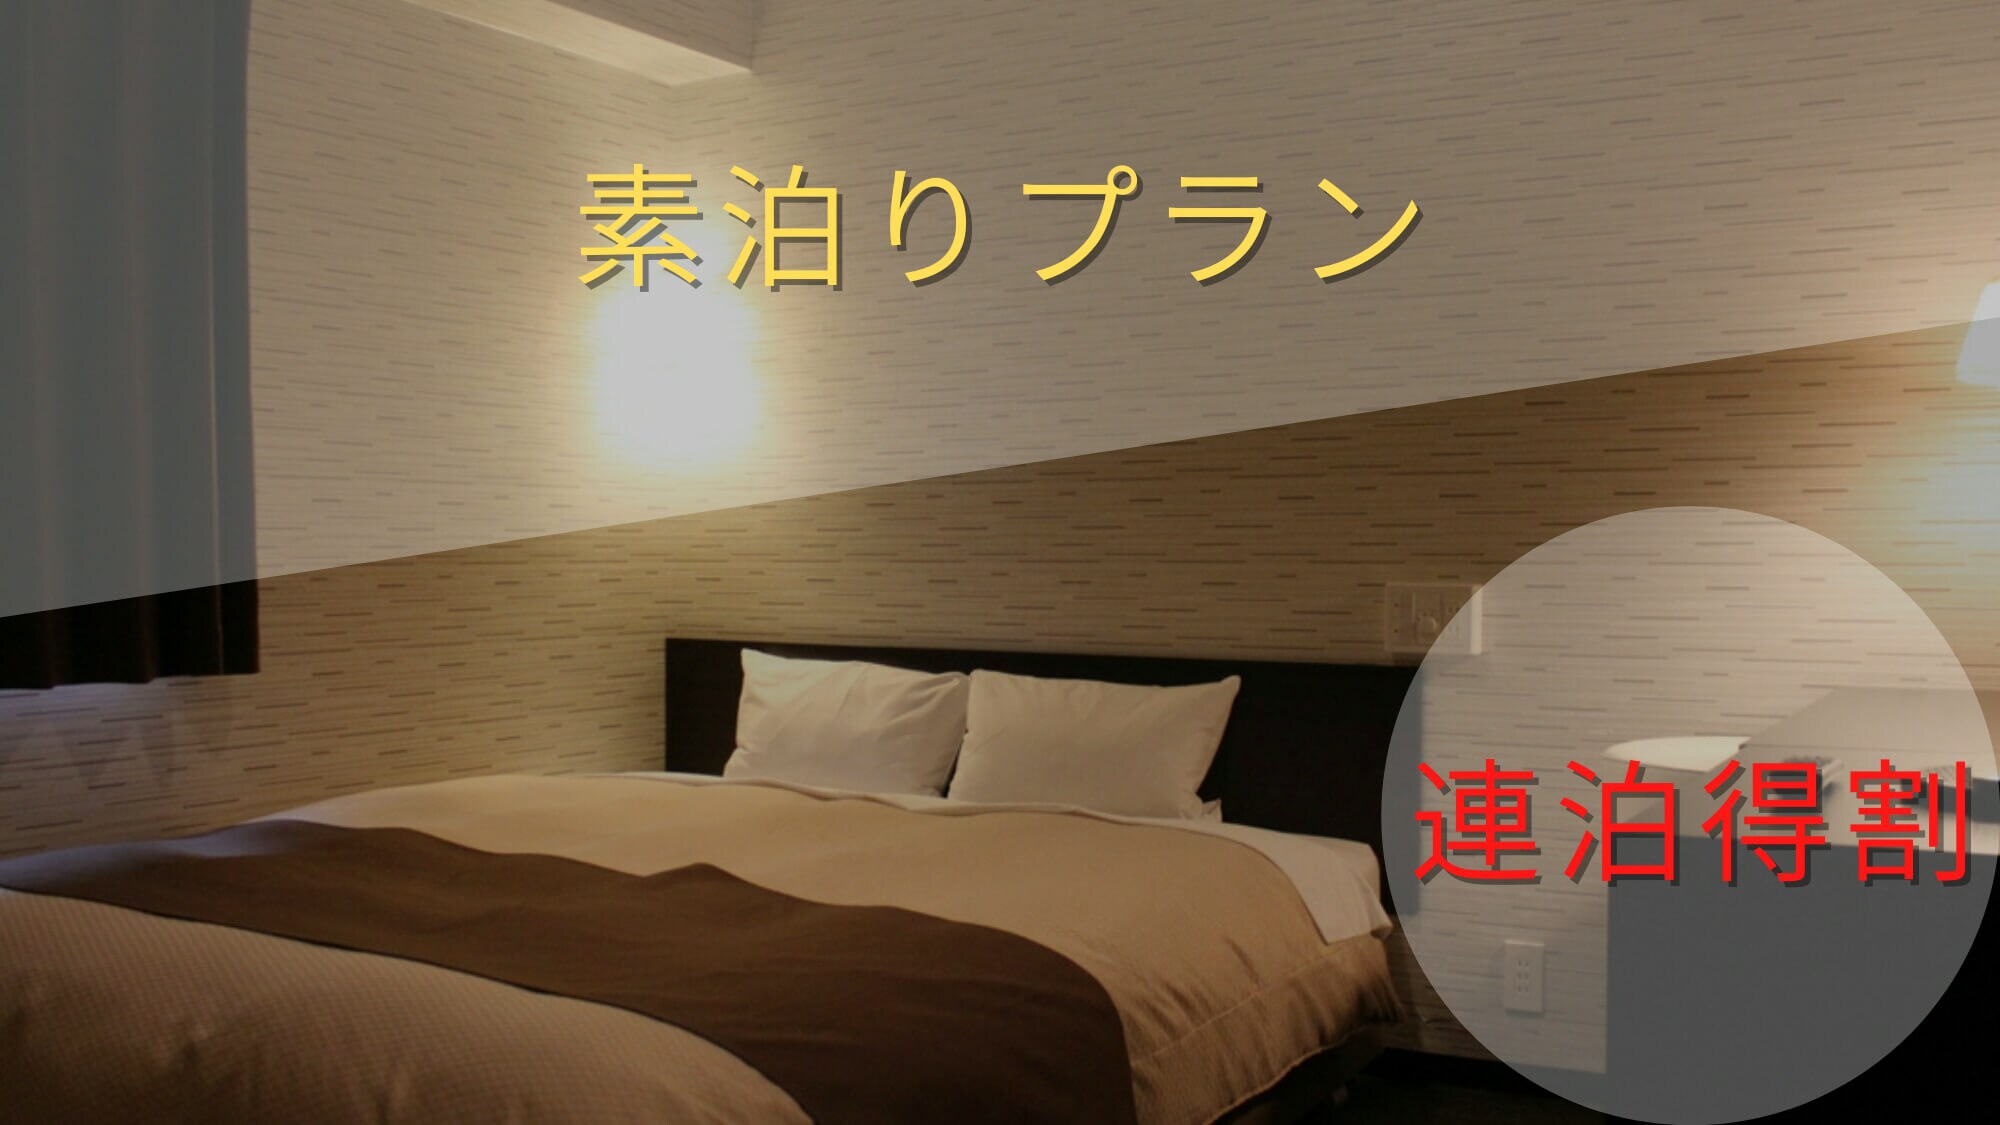 [Consecutive night discount] Great value for reservations of 2 consecutive nights or more ♪ [Pursuit of cost performance! ] Room without meals / accommodation plan